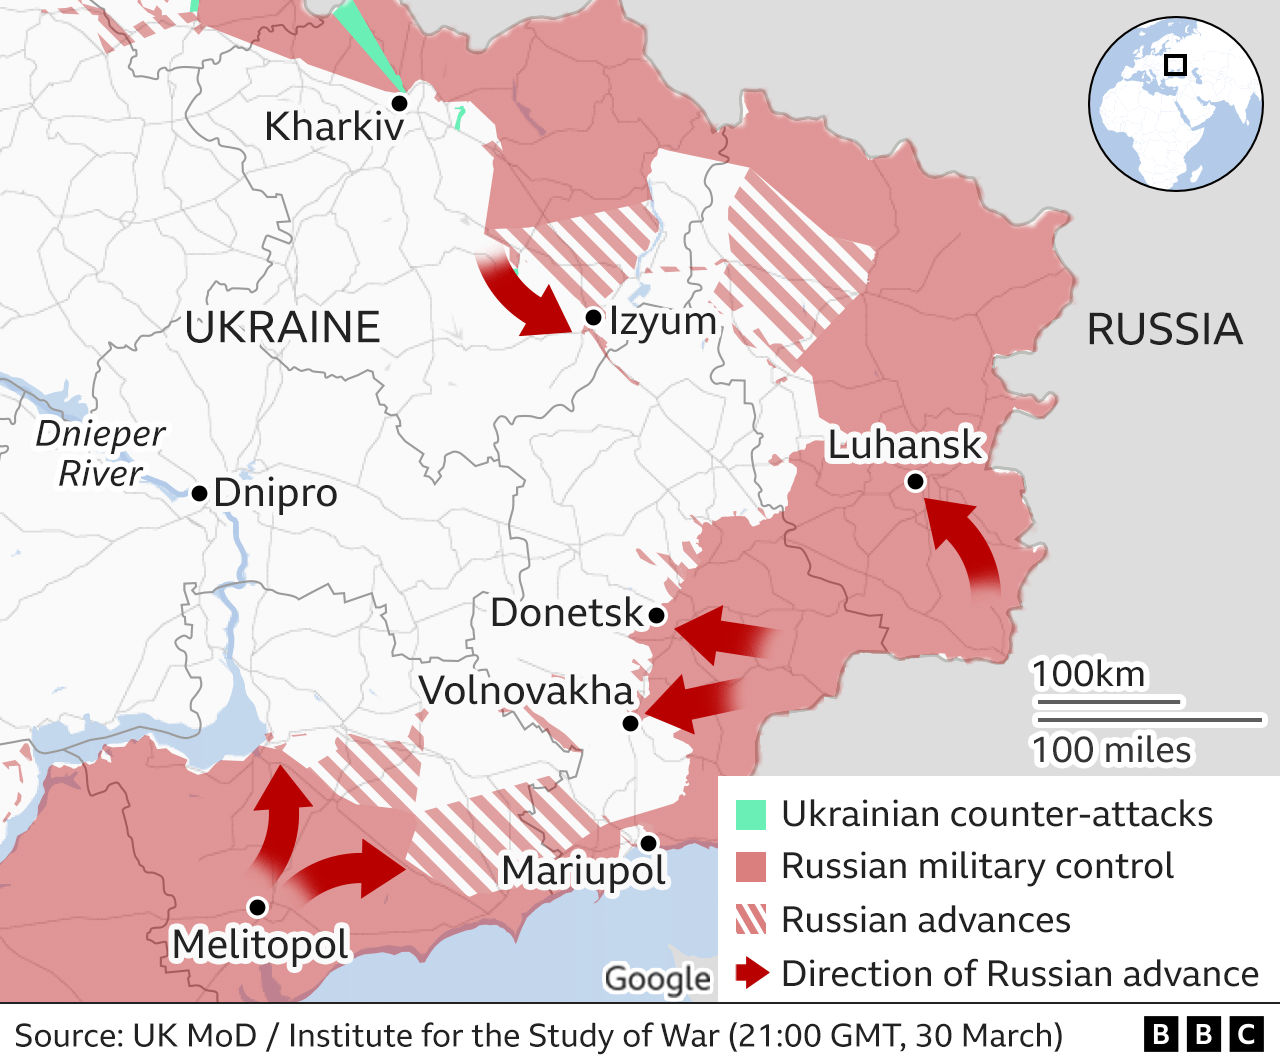 https://ichef.bbci.co.uk/news/976/cpsprodpb/15442/production/_123960178_ukraine_invasion_east_map_640x2-nc.png